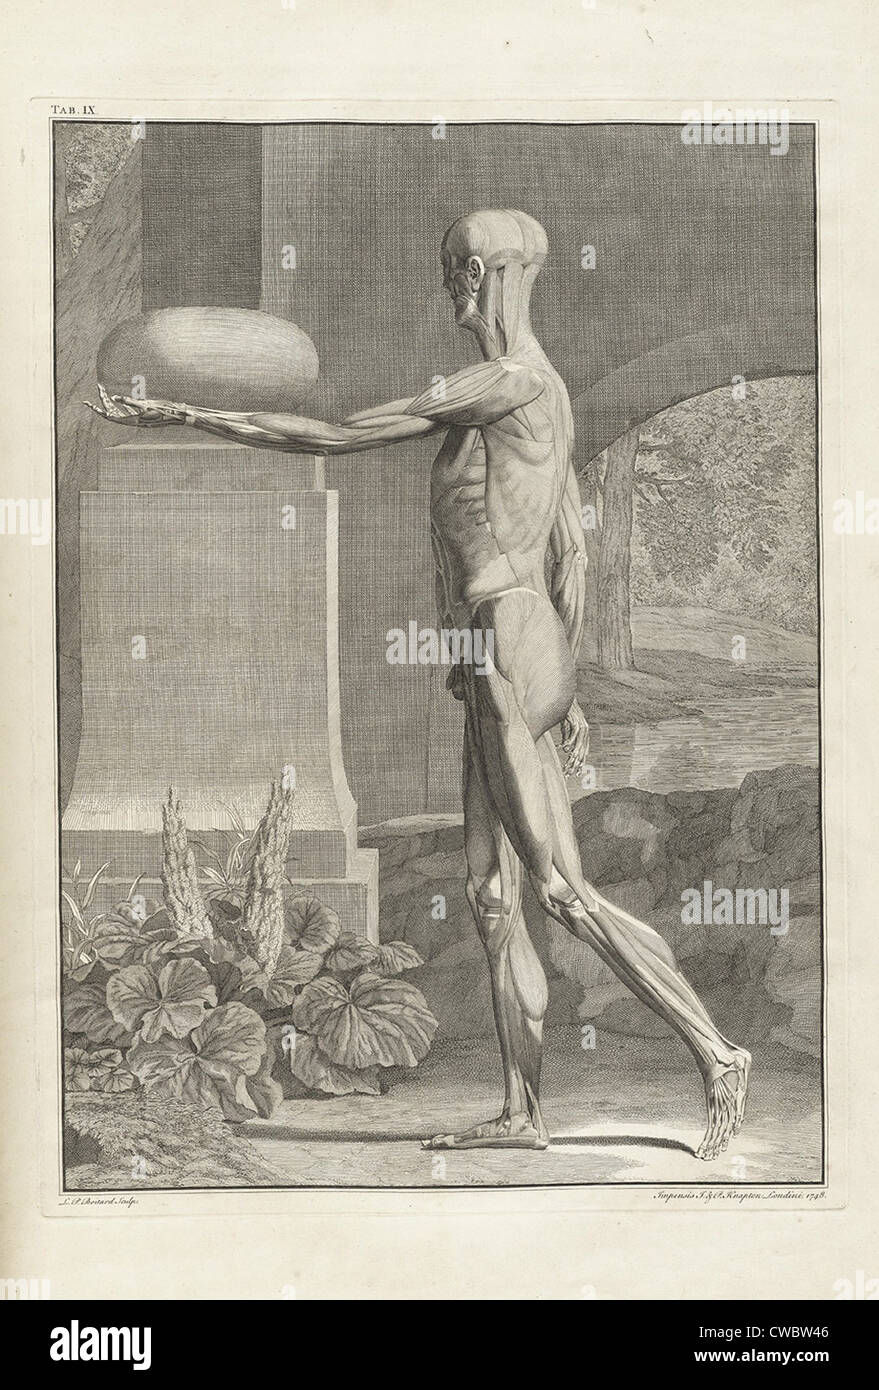 Musculature plate from 18th century anatomy treatise by Bernhard Albinus, with engravings by Jan Wandelaar (1690-1759). The Stock Photo